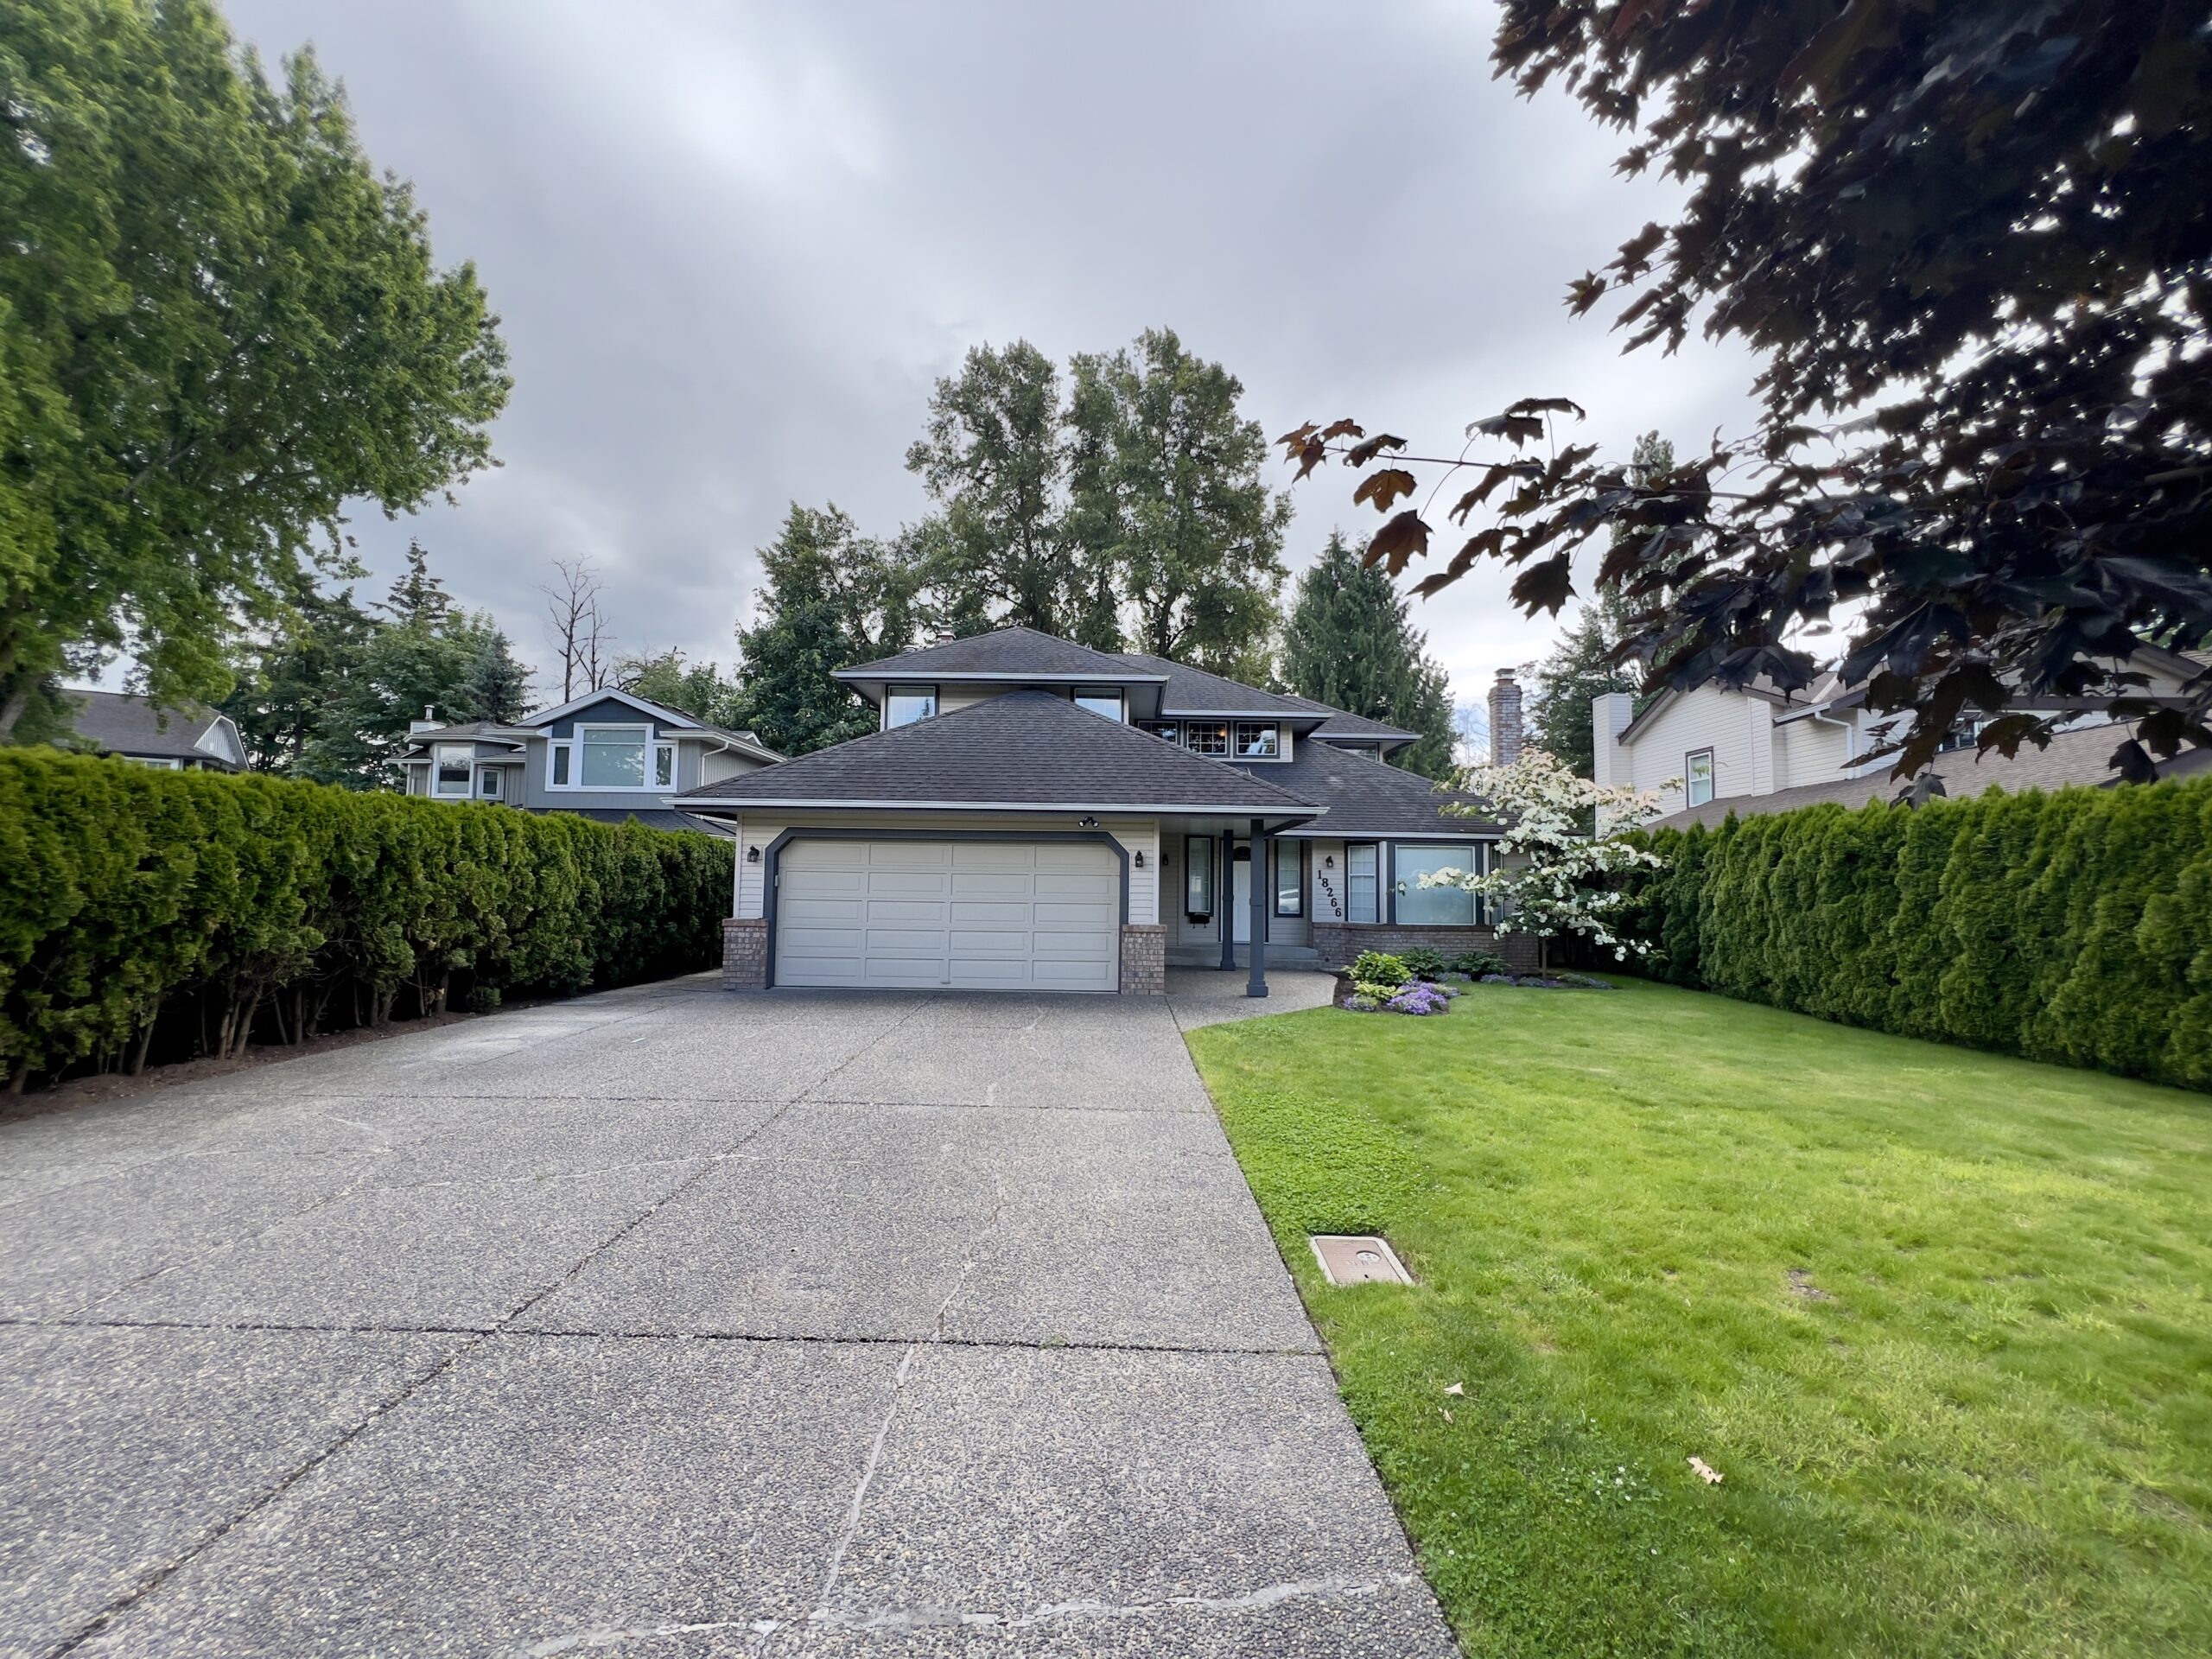 CLOVERDALE – 3 BED 2.5 BATH HOUSE! HUGE YARD AND DRIVEWAY